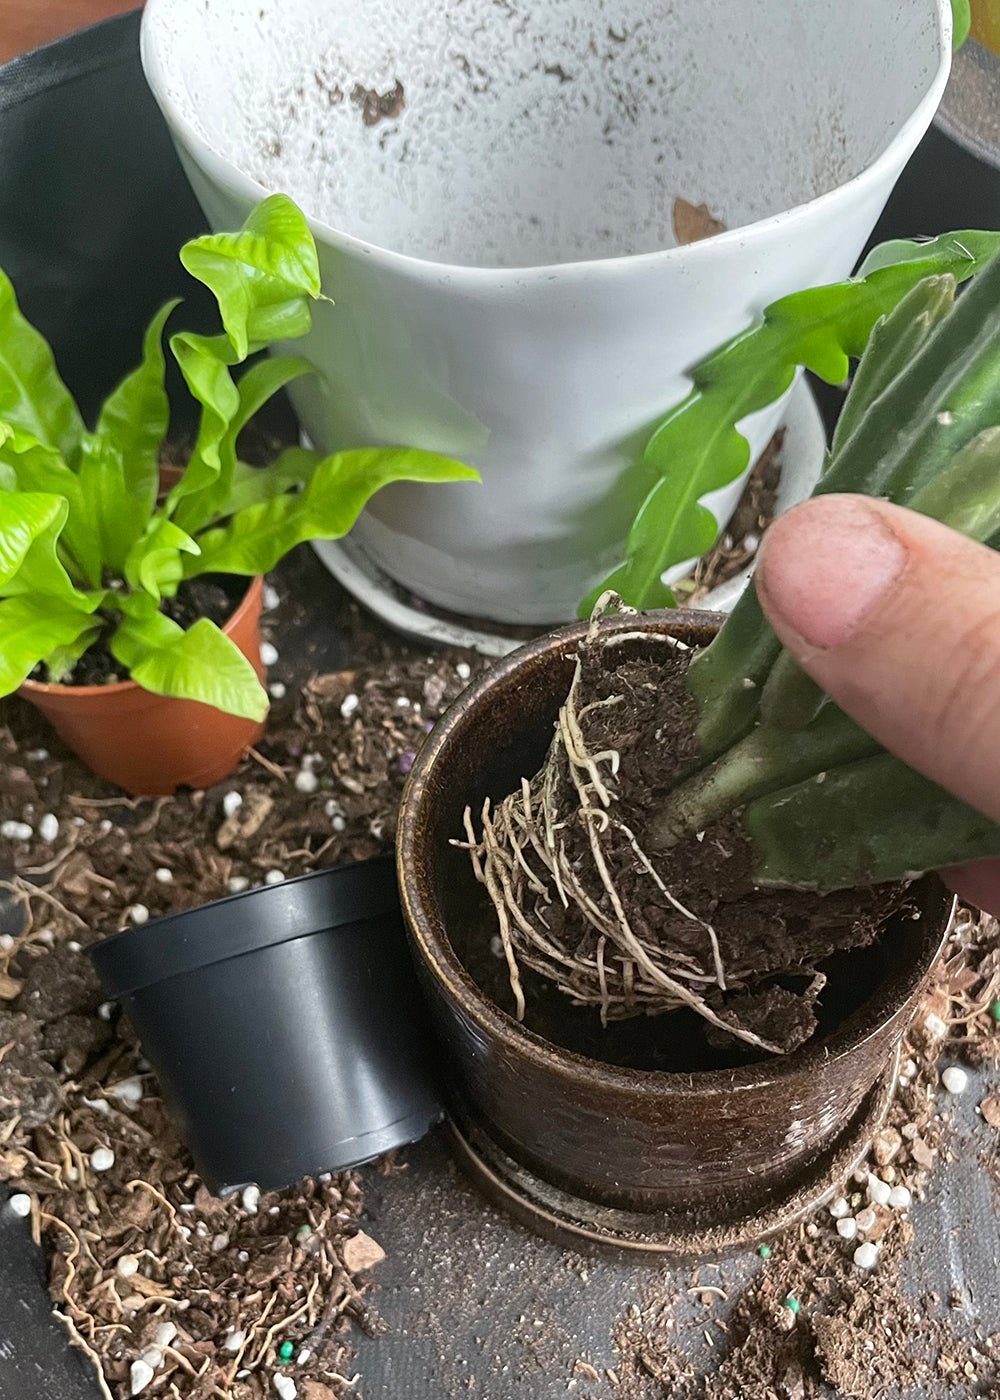 Find pots that are more breathable for your plants